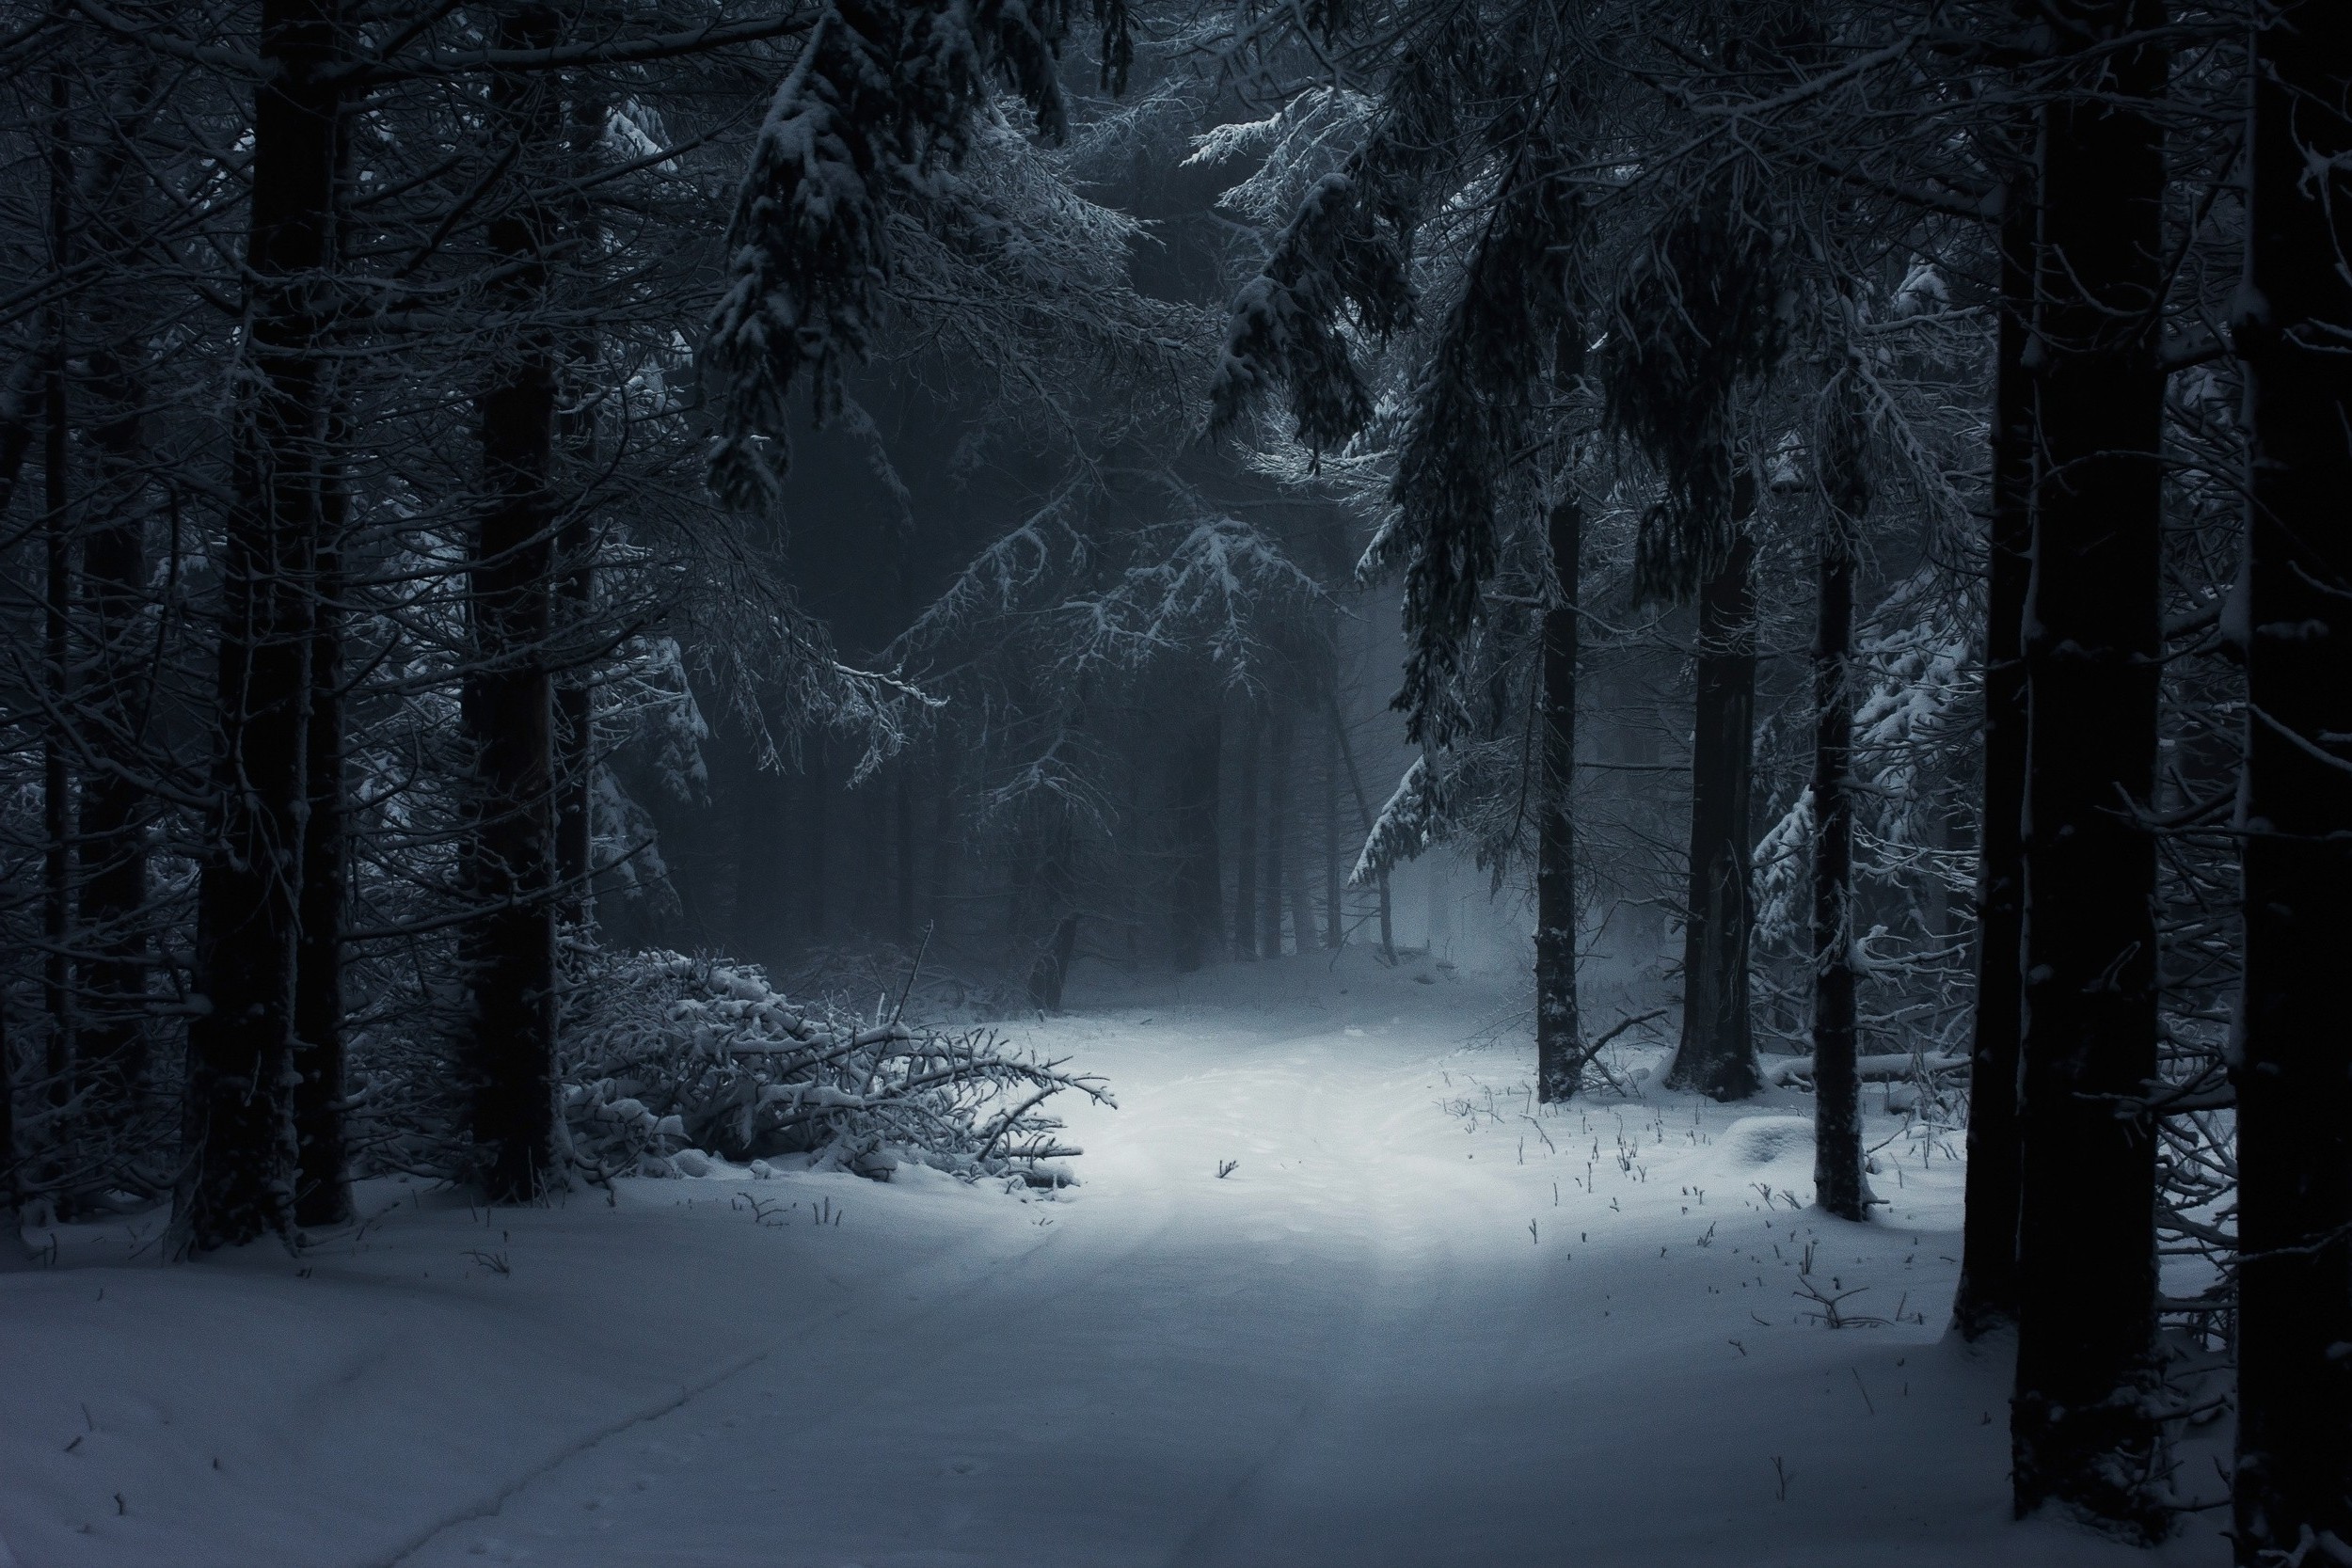 photography landscape nature winter forest snow mist daylight path trees atmosphere fairy tale hungary wallpaper